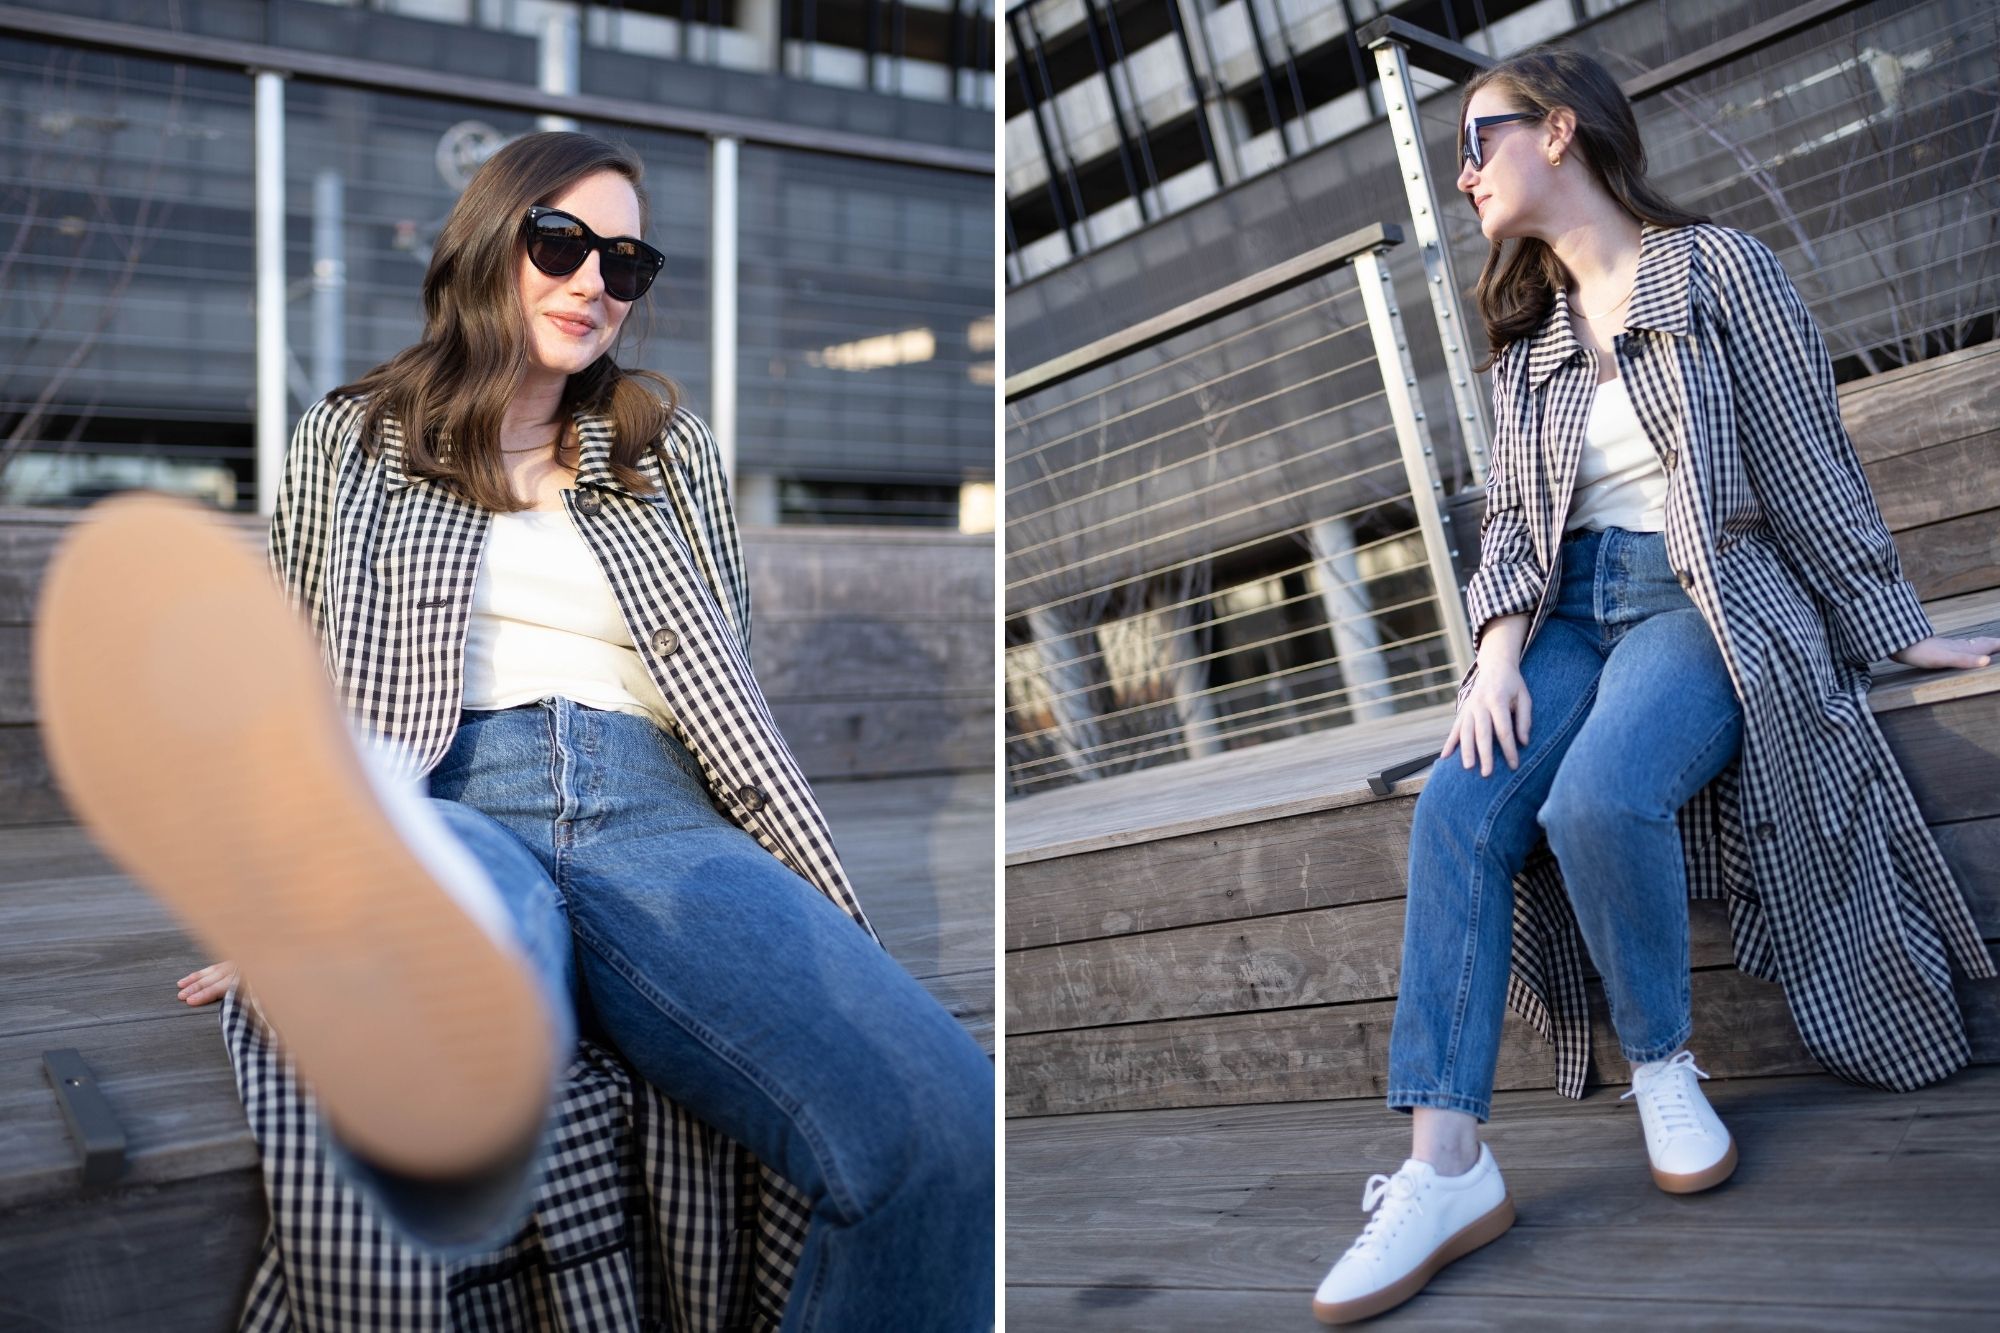 Alyssa wears a cream tank, blue jeans, gingham trench, and white sneakers